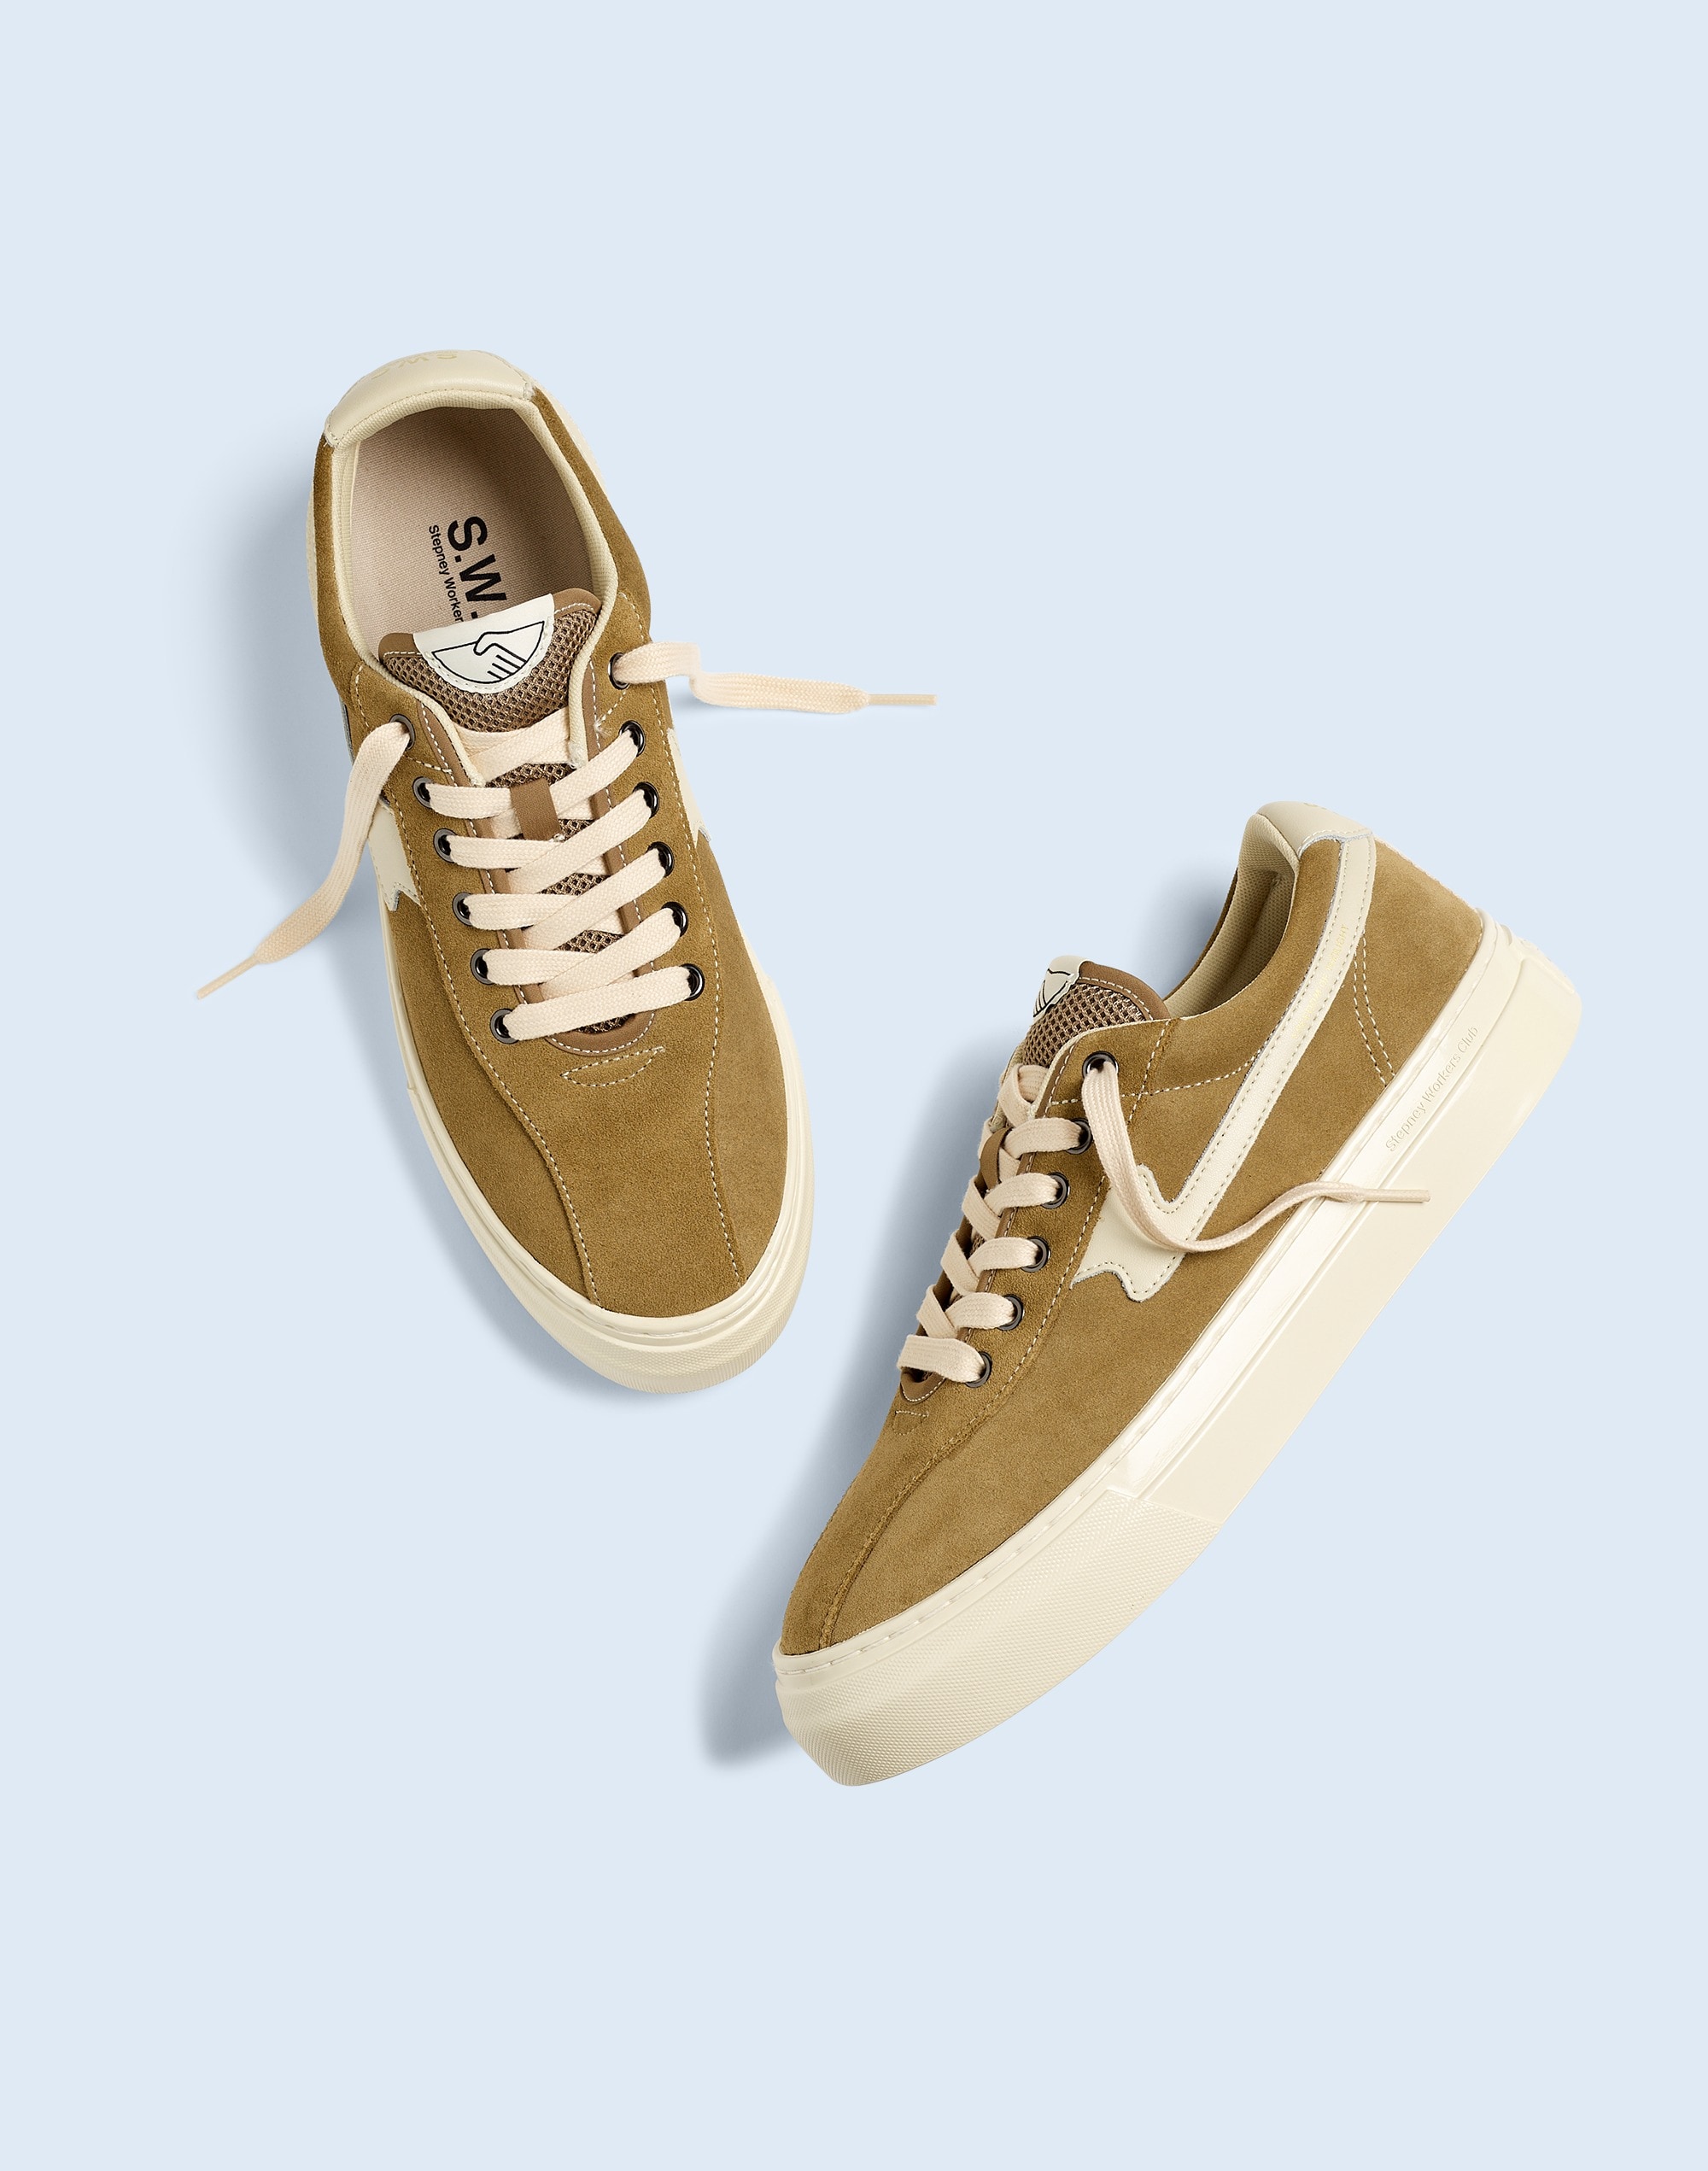 Shop Mw Stepney Workers Club Dellow S-strike Cup Sneakers In Desert And Ecru